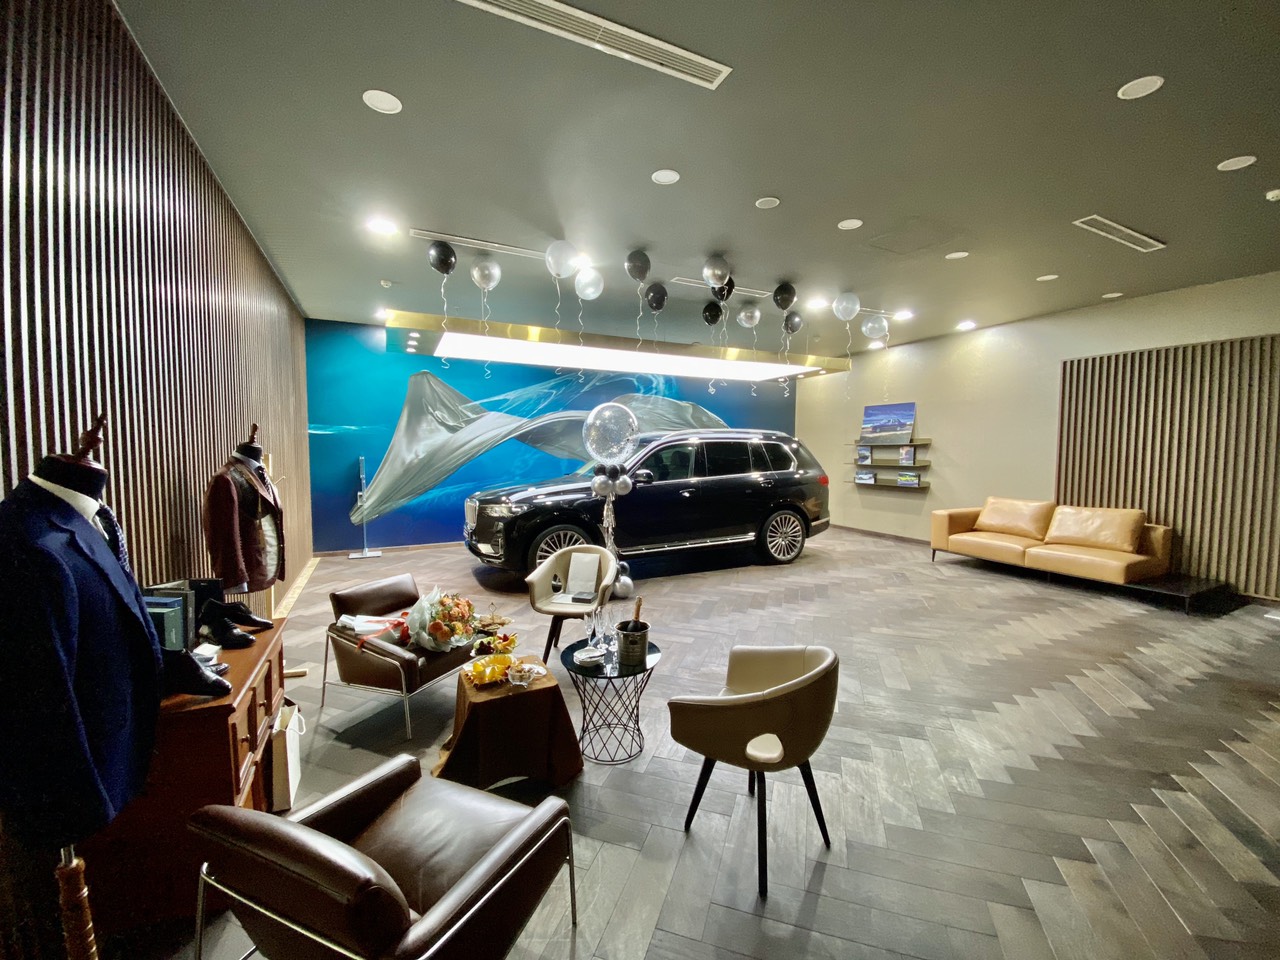 BMW showroom Le Duan: Modern, classy in the heart of the capital